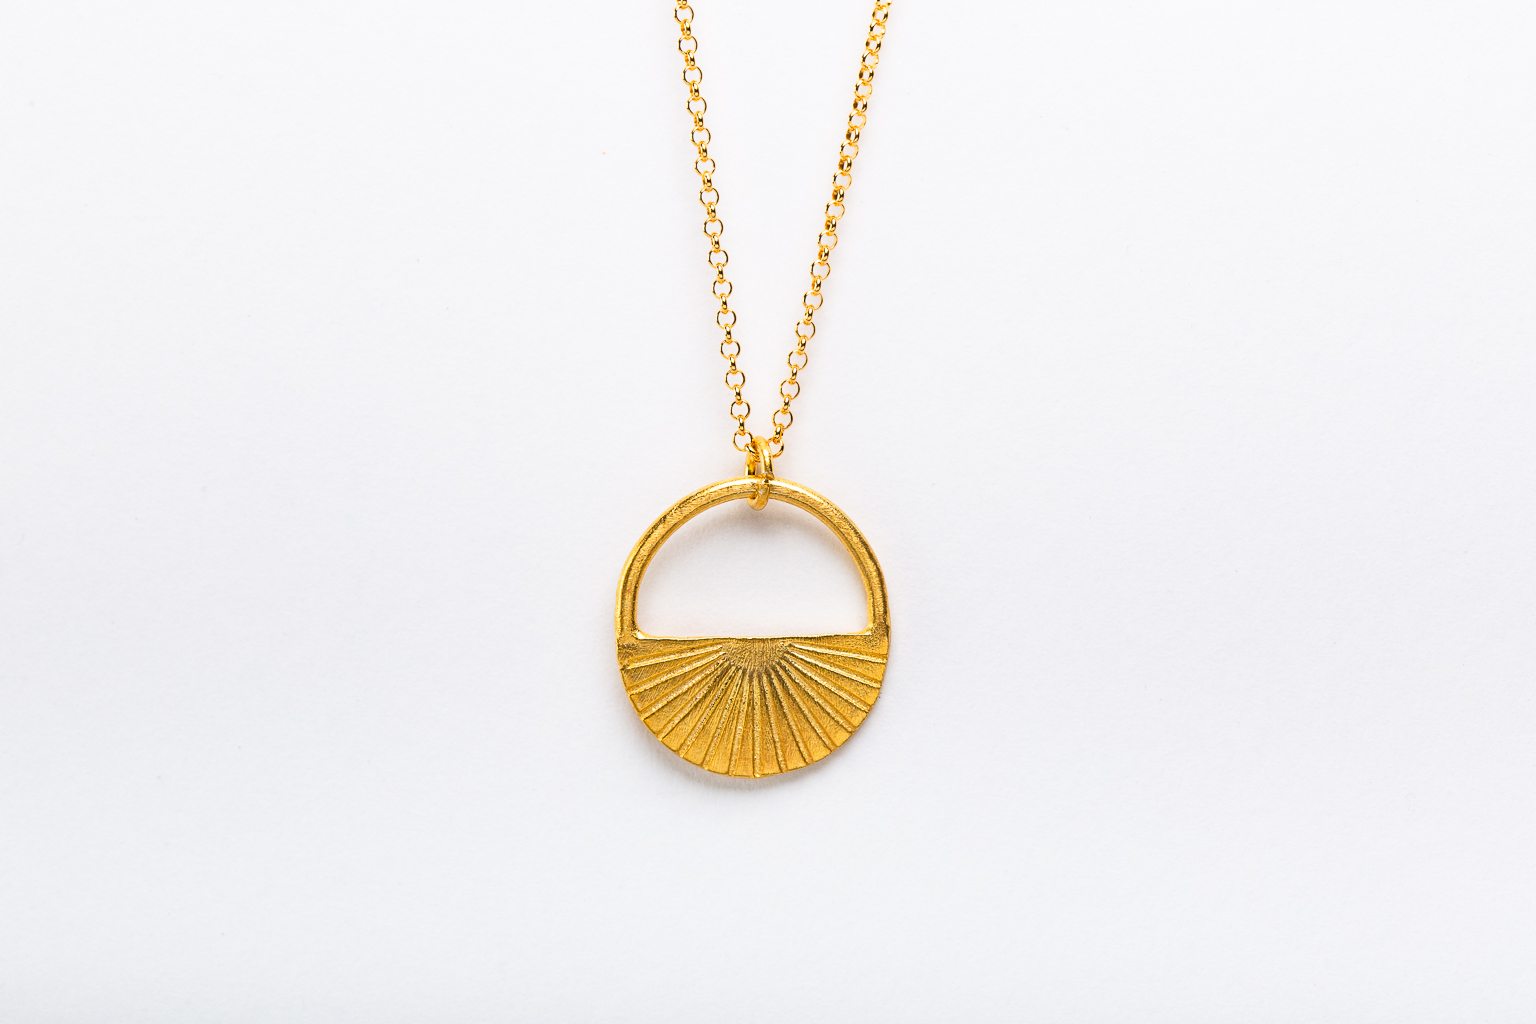 Gold-plated "Lotus" necklace